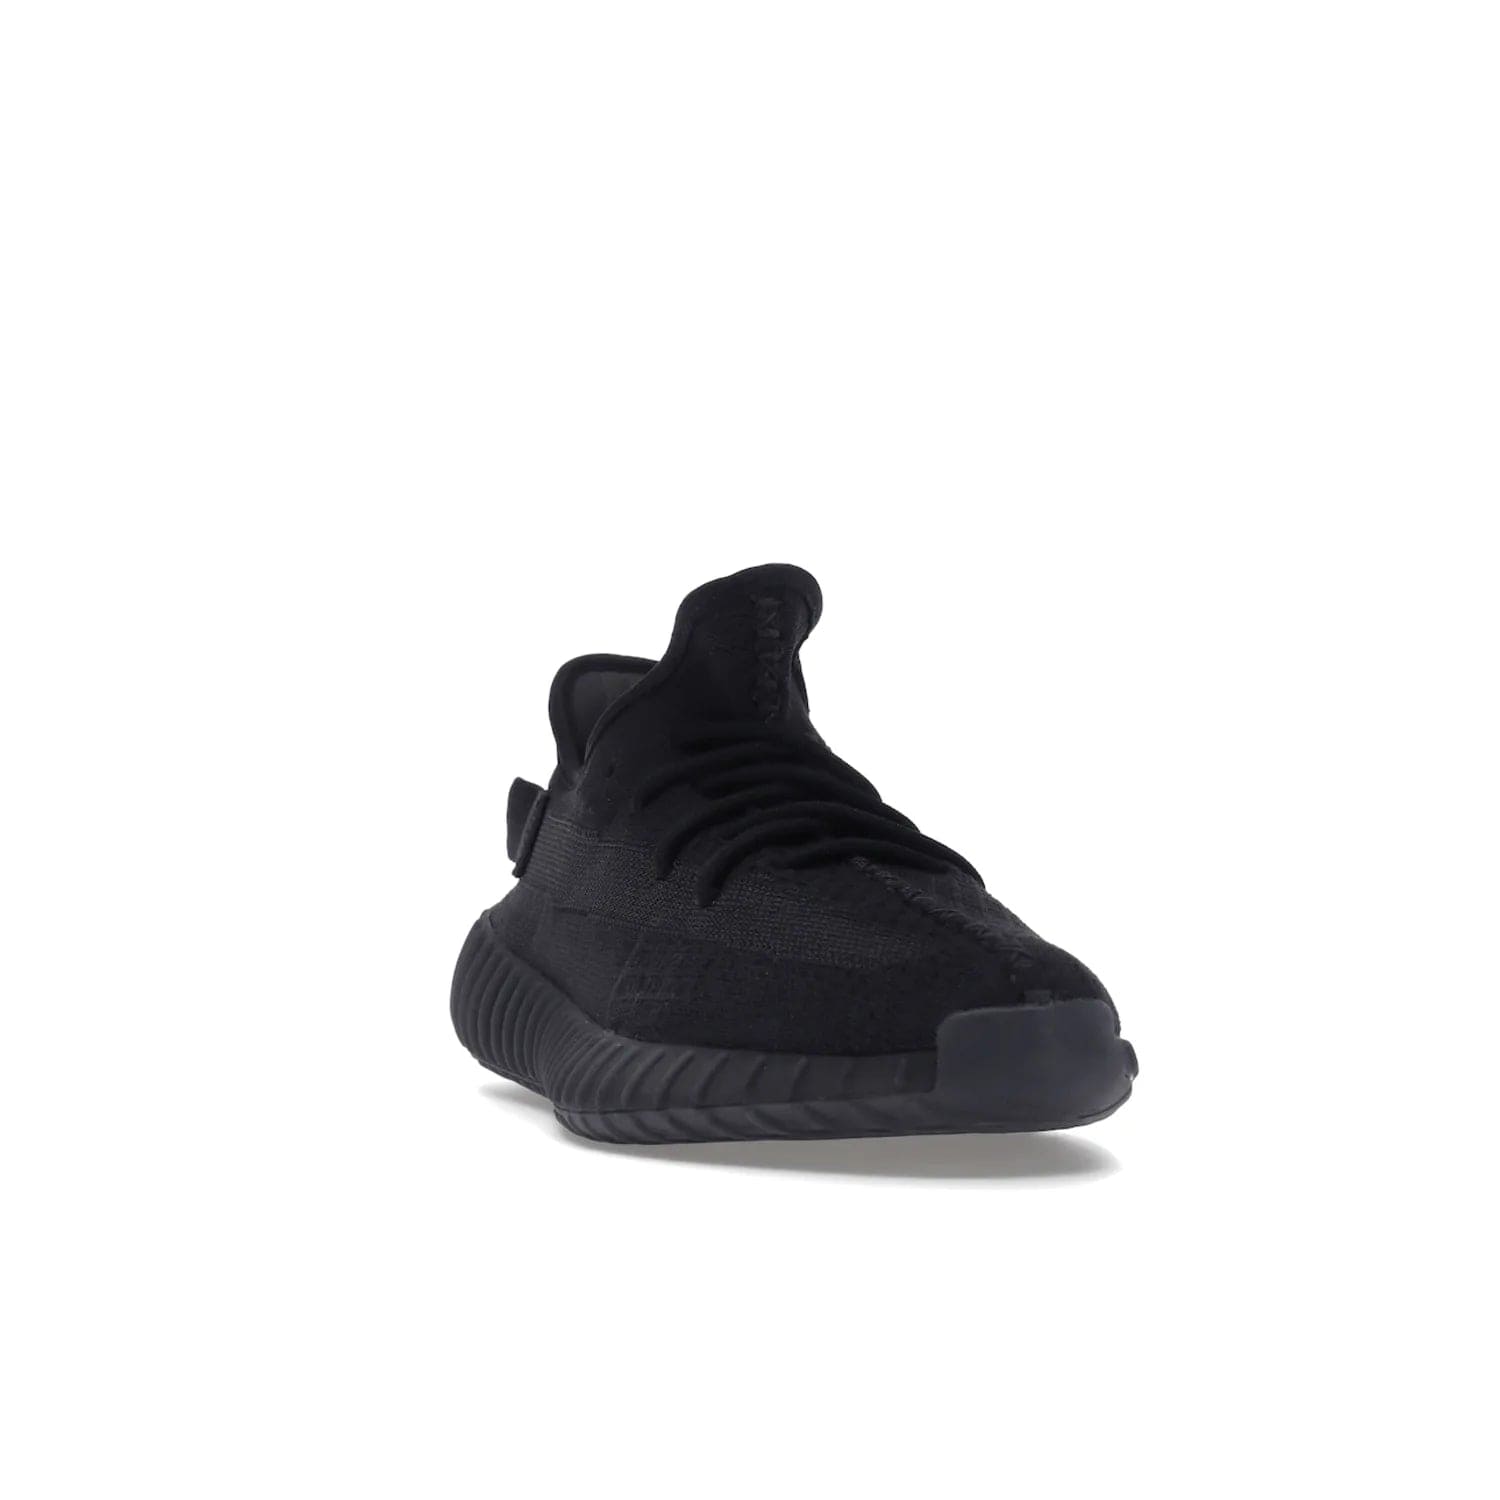 adidas Yeezy Boost 350 V2 Onyx - Image 8 - Only at www.BallersClubKickz.com - Adidas Yeezy Boost 350 V2 Onyx Triple Black shoes for comfort and style. Arriving Spring 2022.